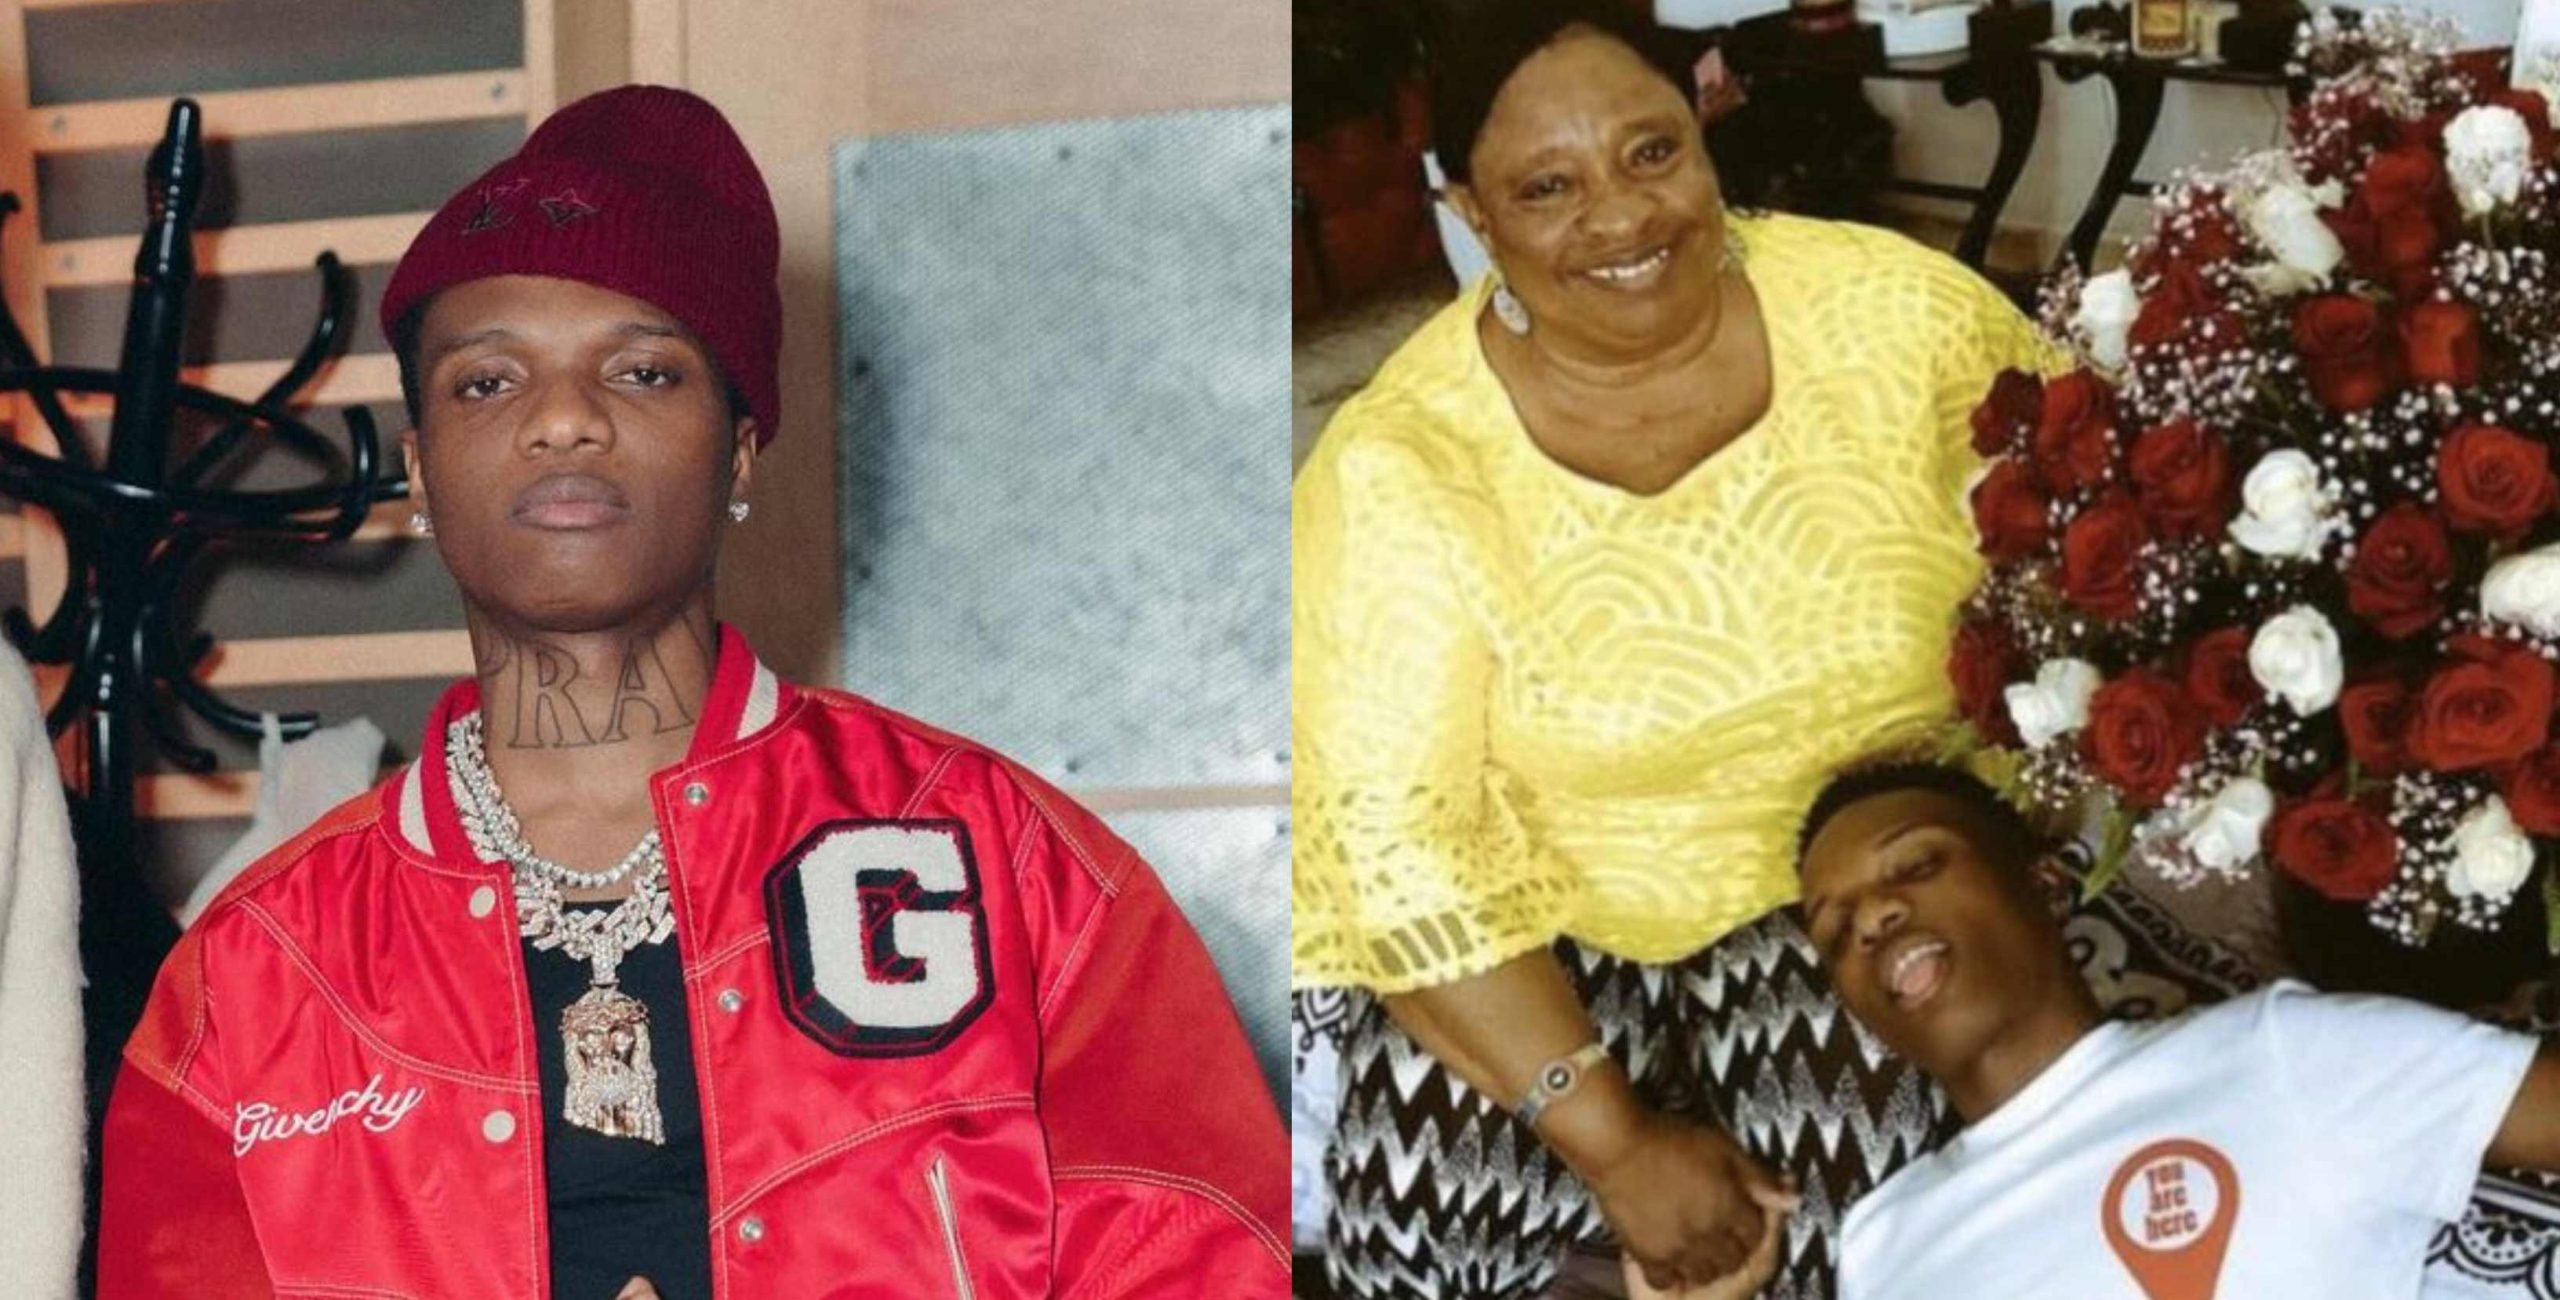 Singer Wizkid names new album after his late mother, sends stern warning to media platforms